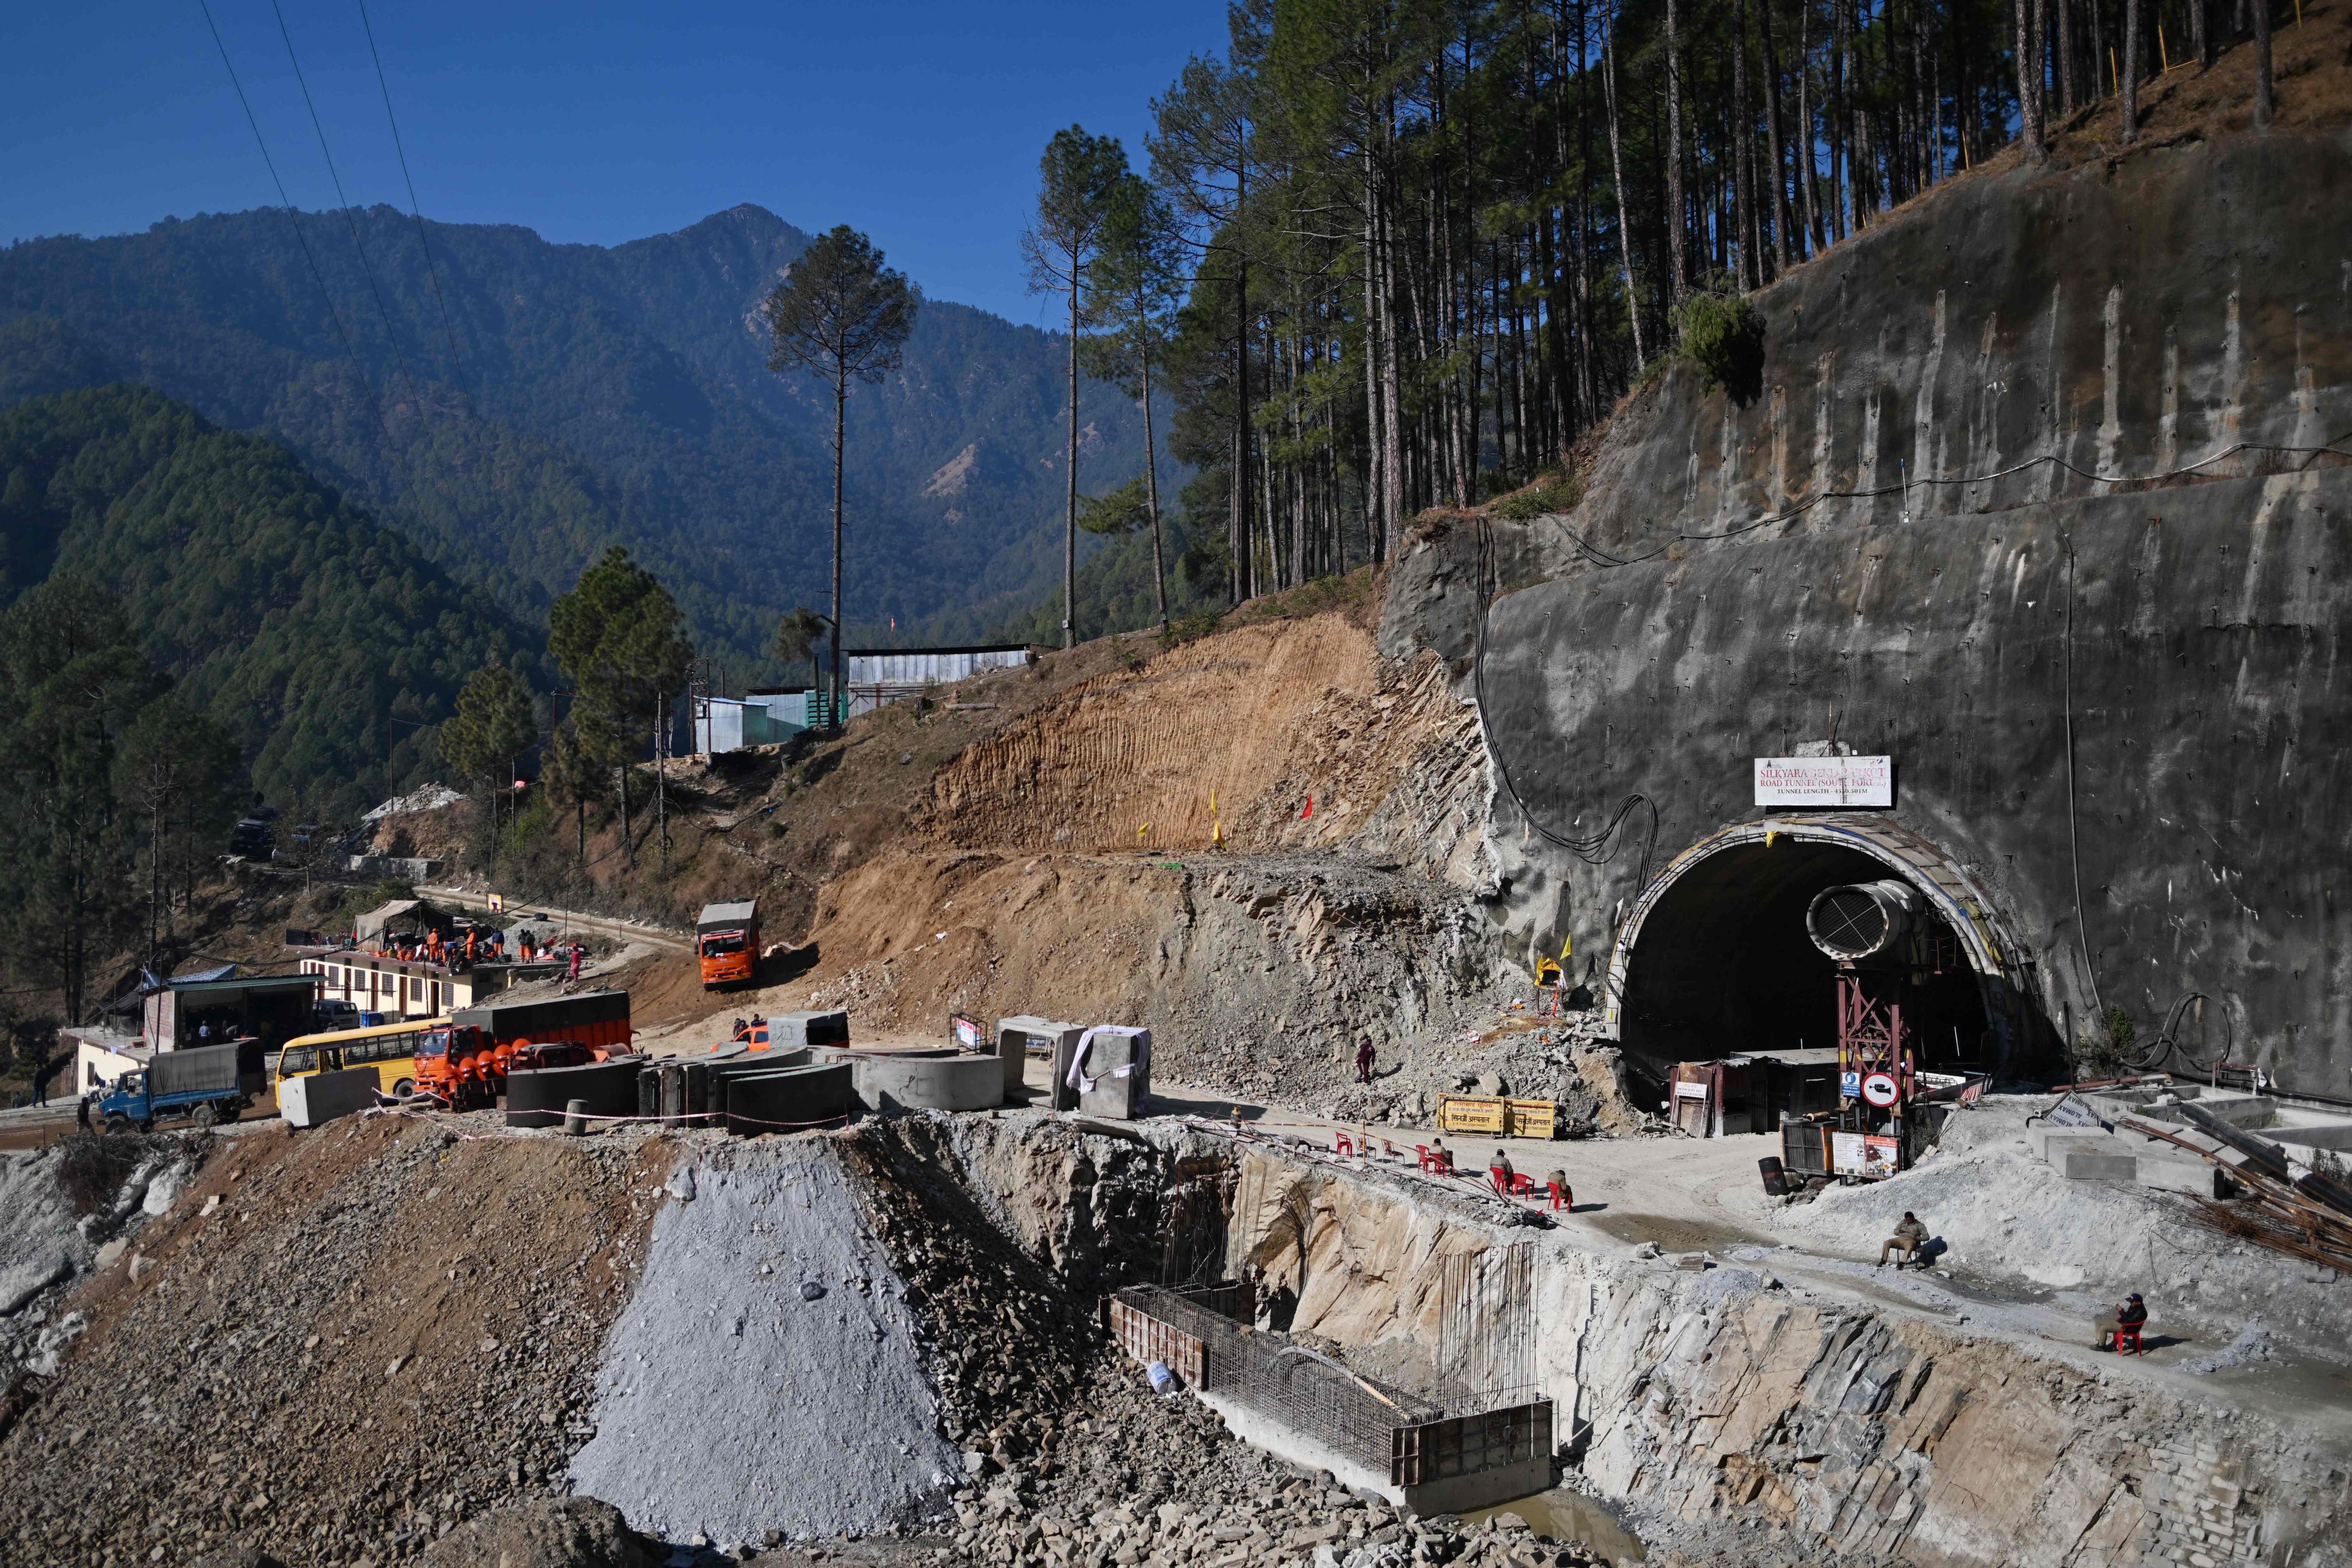 The entrance of the under-construction Silkyara tunnel that caved in is seen in the Uttarkashi district of India’s Uttarakhand state on Wednesday. Experts say the region’s fragile geology makes tunnels such as this one prone to collapse. Photo: AFP